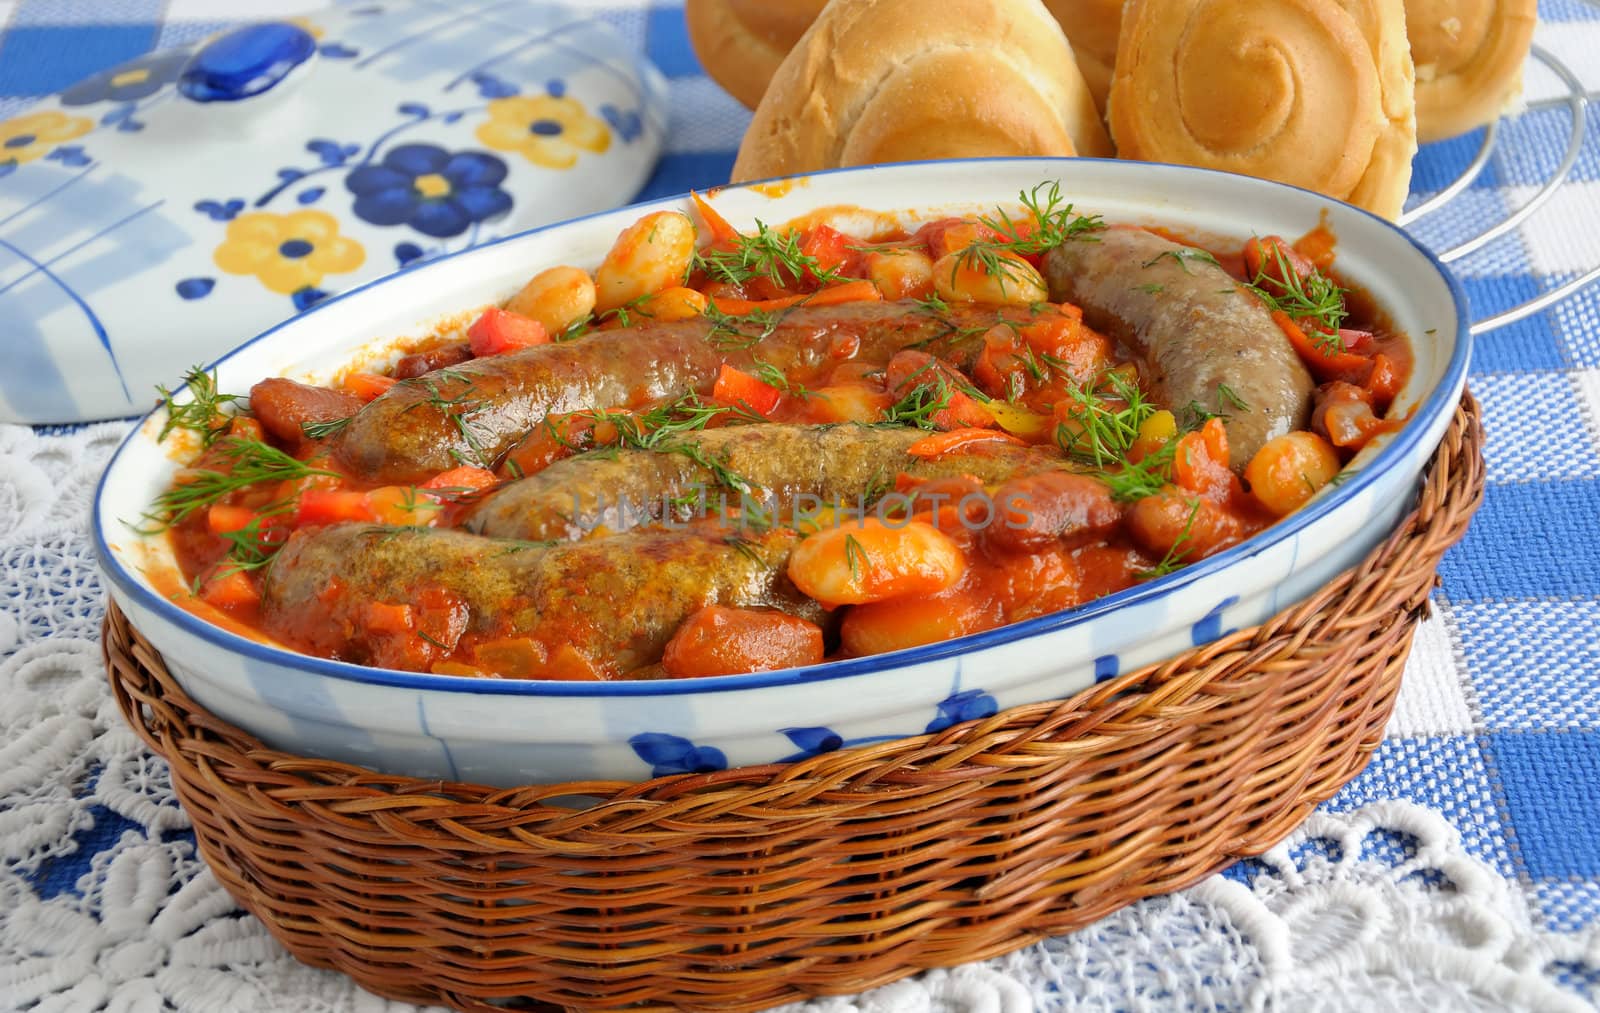 Home sausages with beans by Apolonia